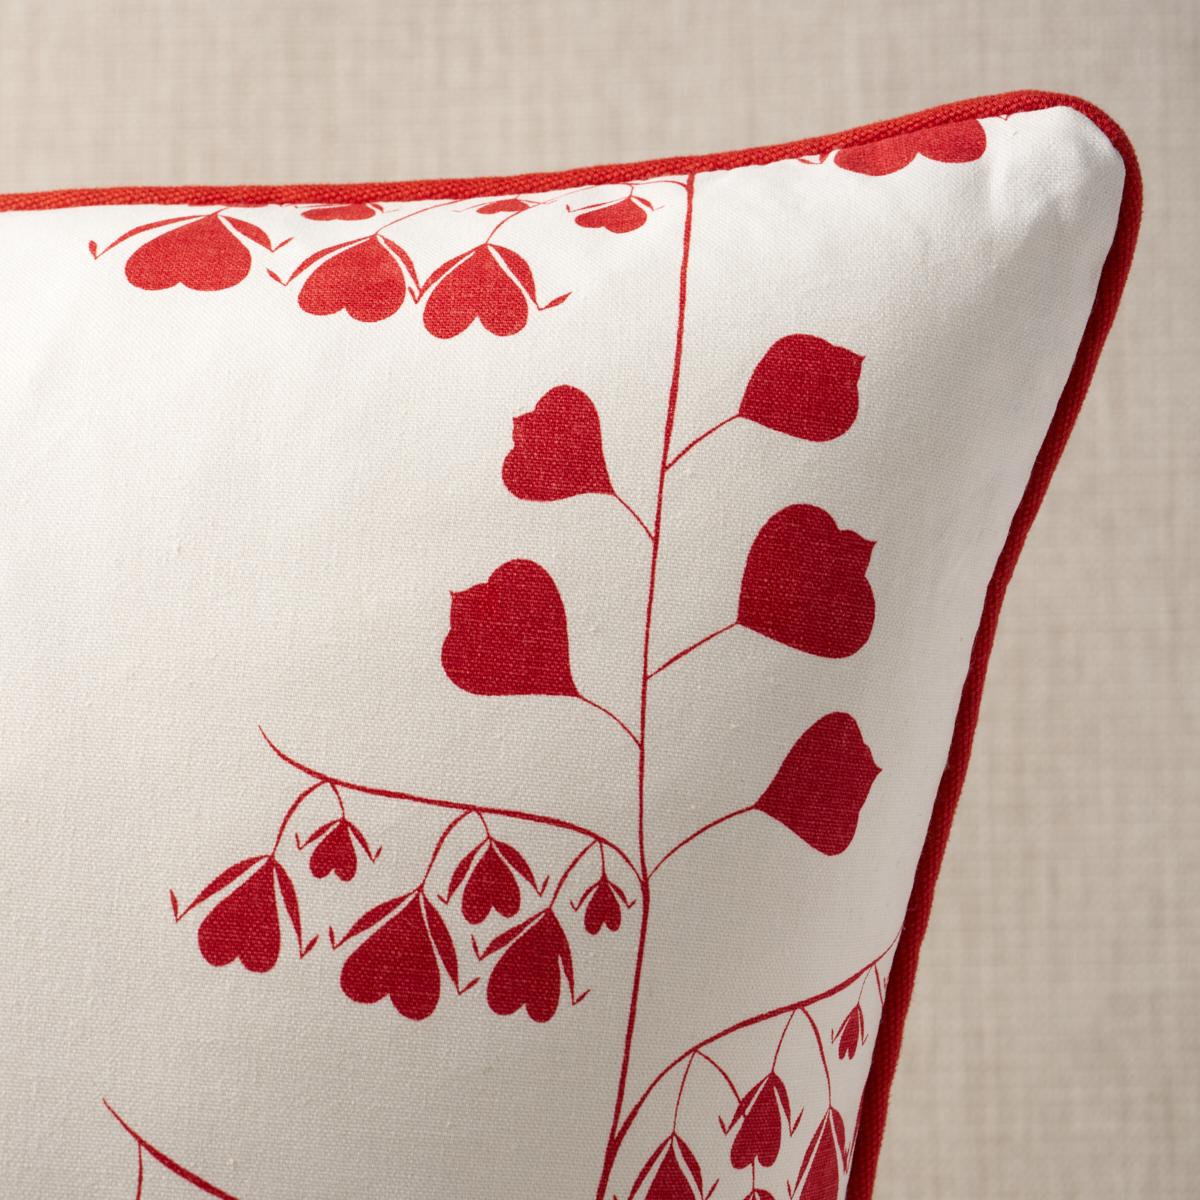 This pillow features Bleeding Hearts by Peg Norriss. Bleeding Hearts derives its delicate floral motif from a painting by artist Clare Rojas. Clean and contemporary, graphic and fresh, this stylized print is a versatile medium-scale design that is